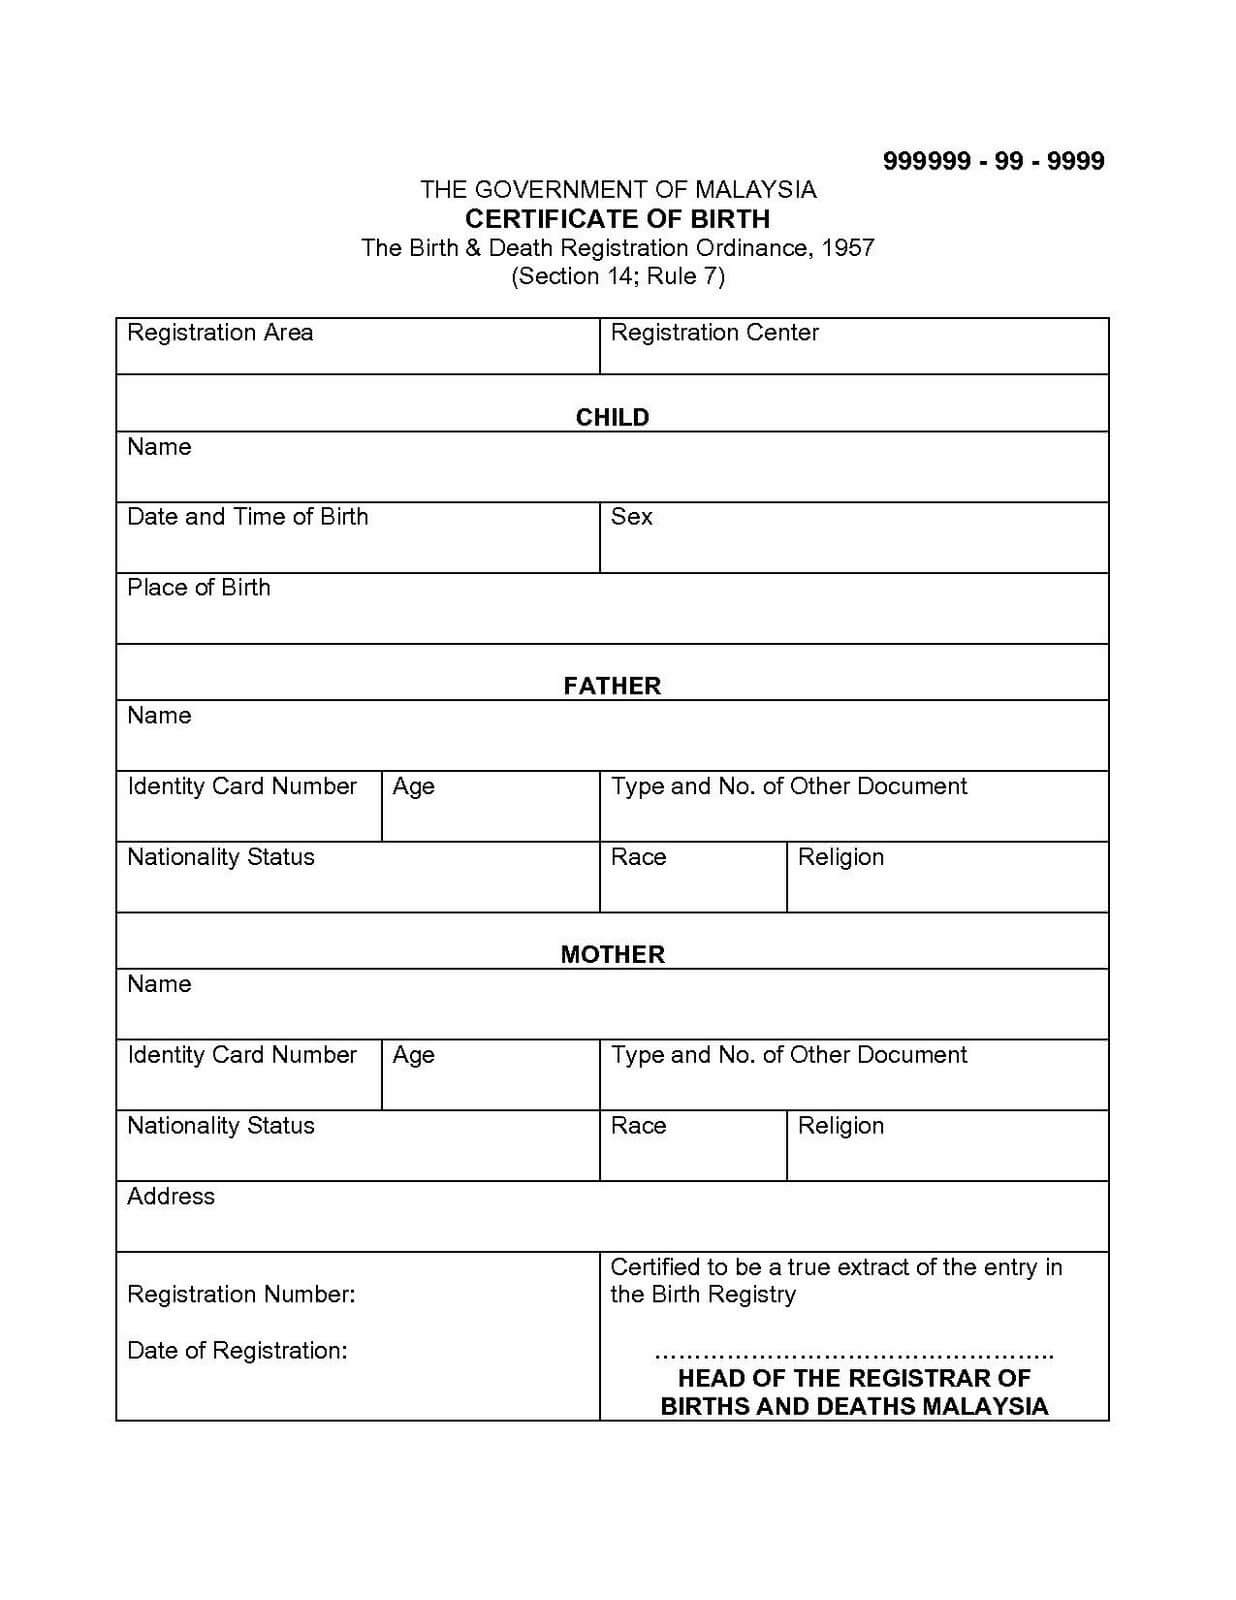 Marriage Certificate Doc Ukran Agdiffusion Com Translate With Marriage Certificate Translation From Spanish To English Template